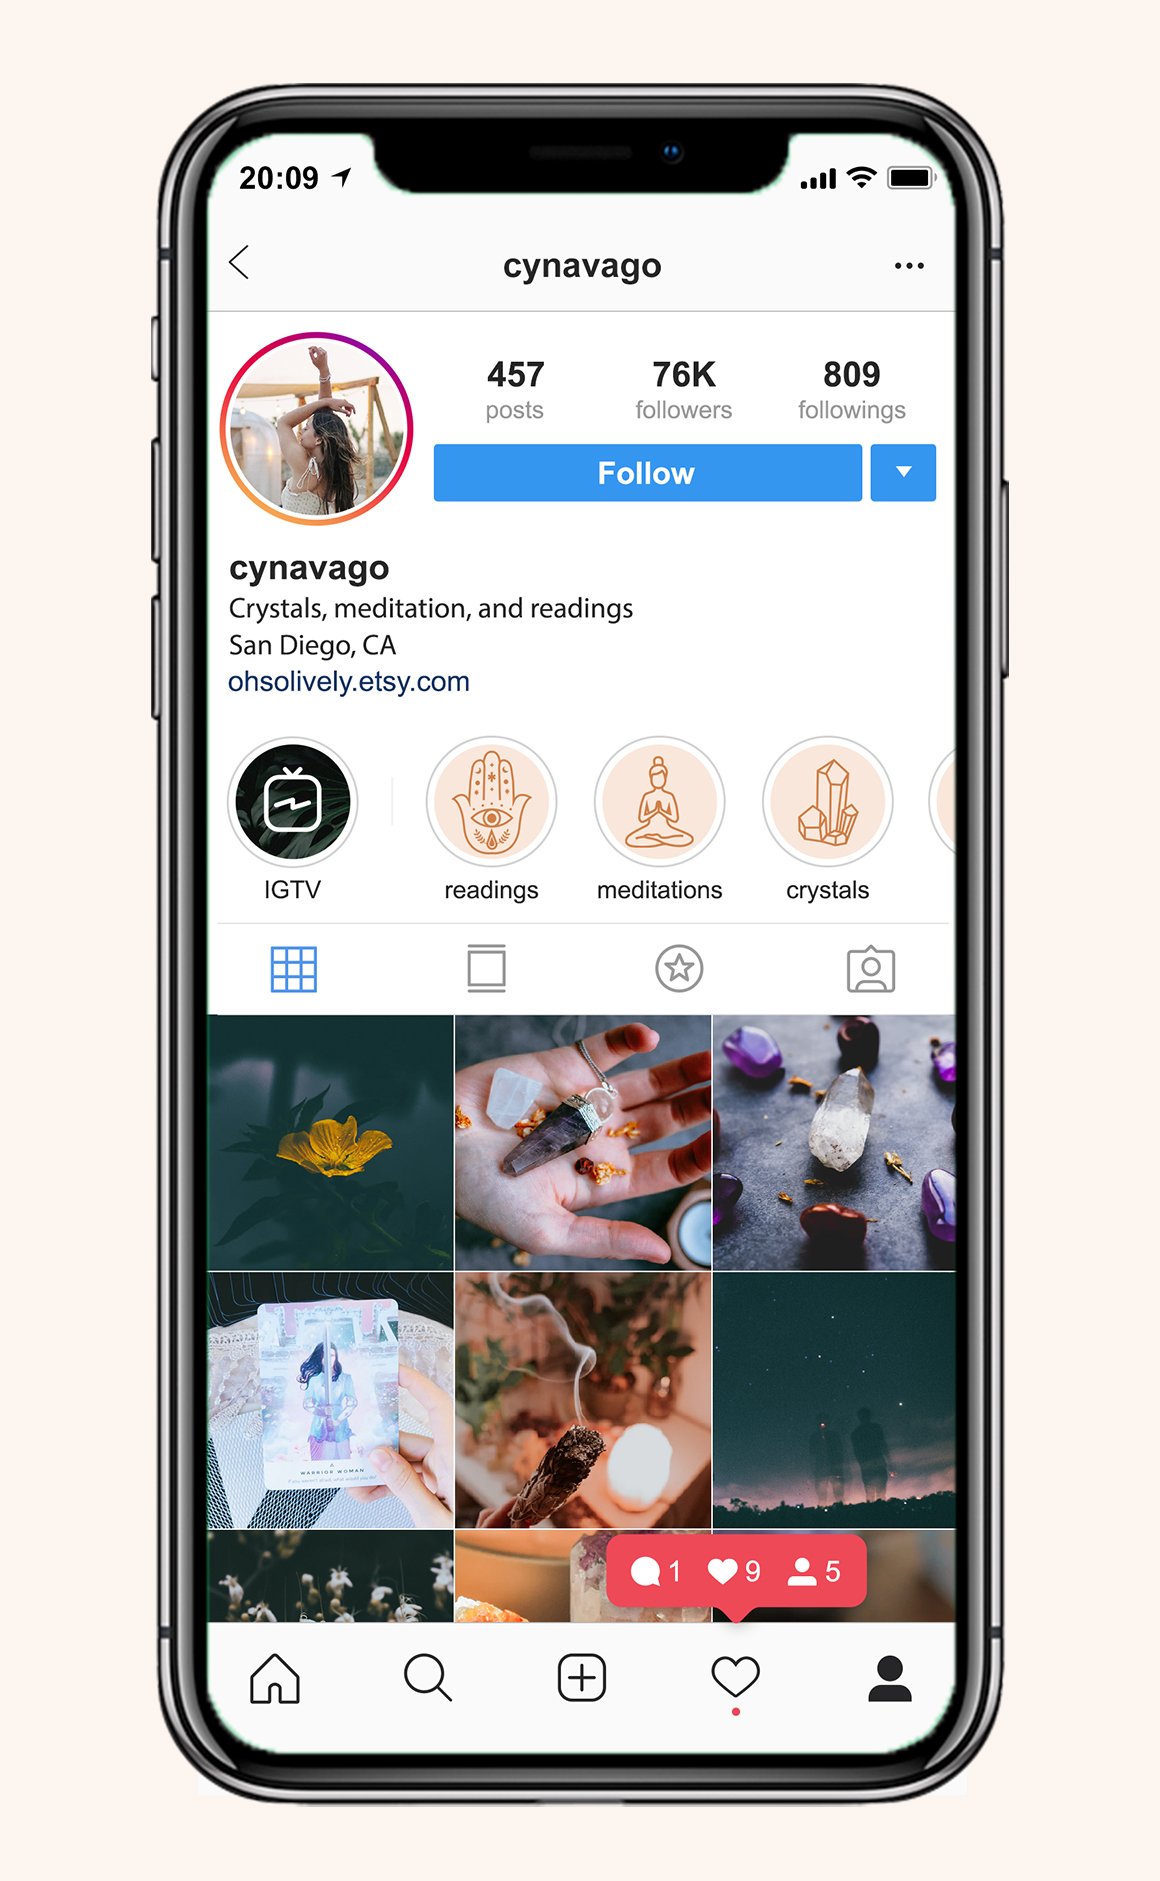 Magical Instagram Highlight Icons